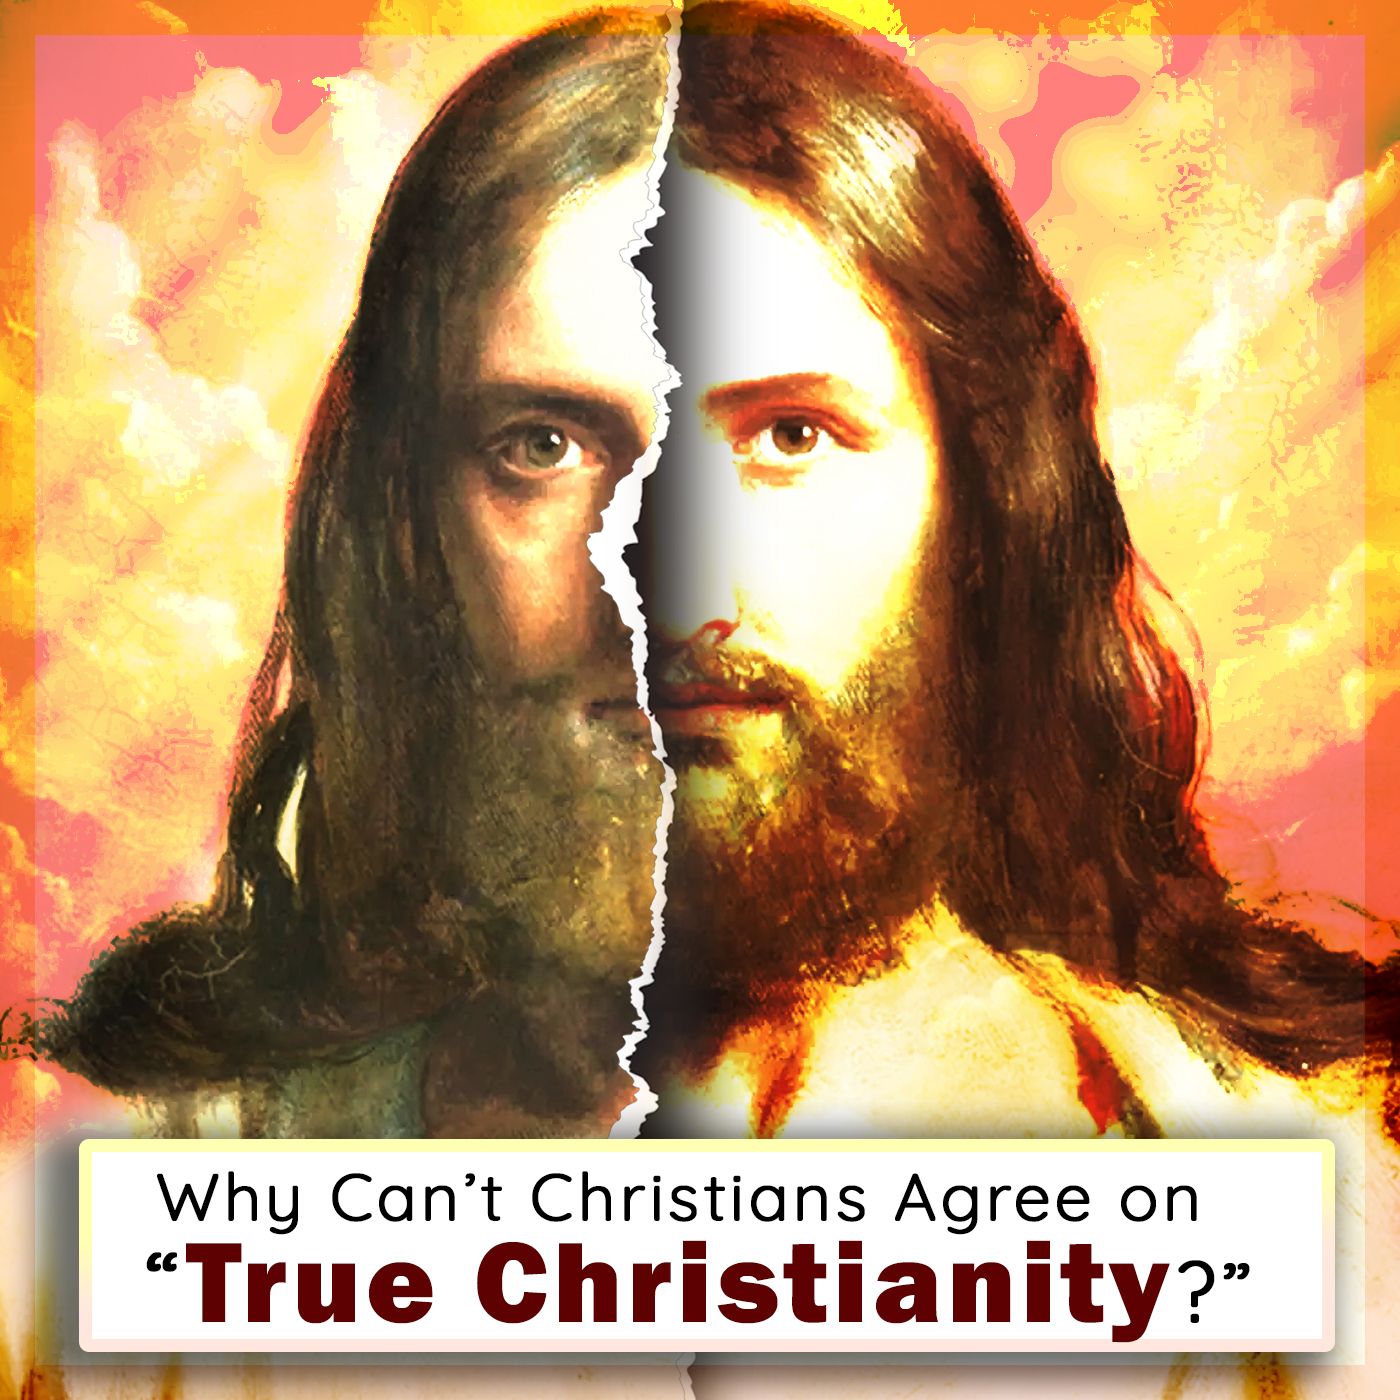 Why Can’t Christians Agree on ”True Christianity?”